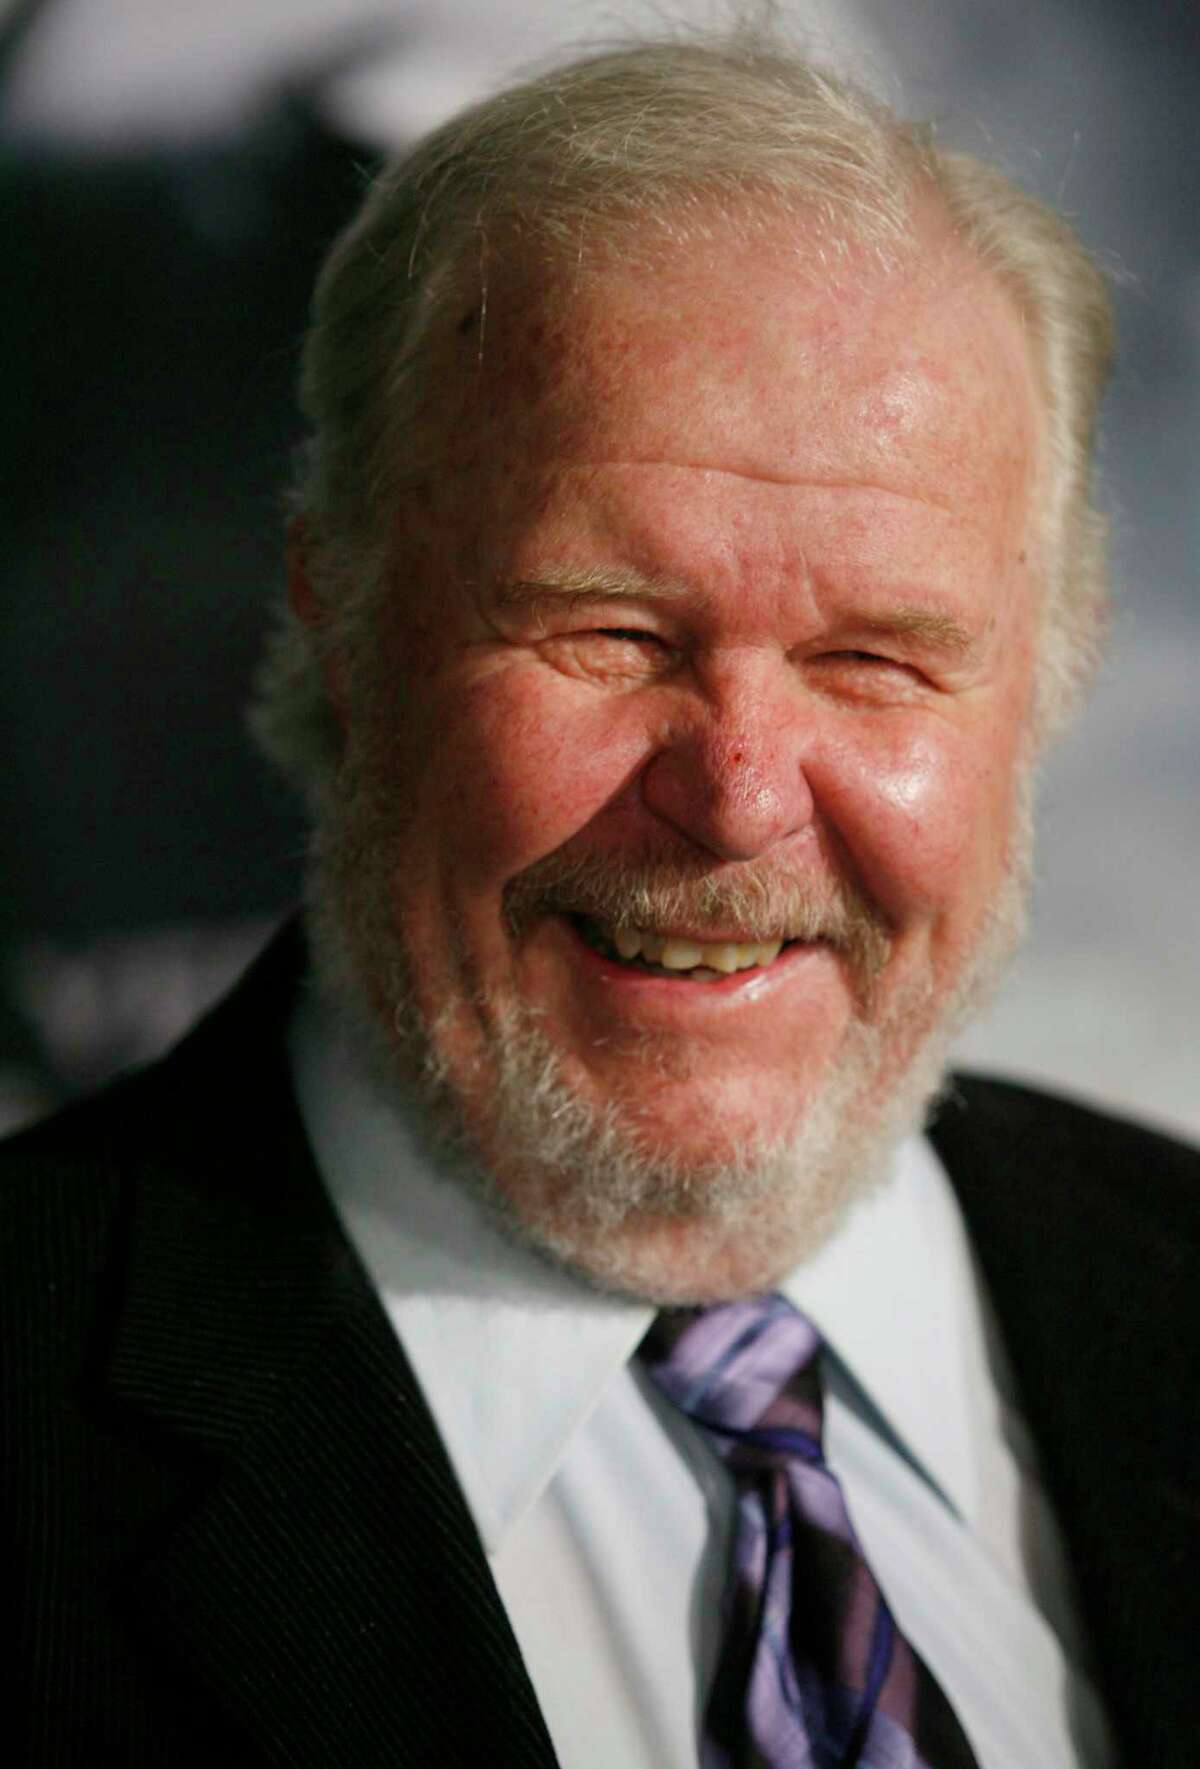 FILE - In this Thursday, March 8, 2007, file photo, actor Ned Beatty arrives at the premiere of the movie "Shooter," in Los Angeles. Beatty, the indelible character actor whose first film role, as a genial vacationer brutally raped by a backwoodsman in 1972′s “Deliverance,” launched him on a long, prolific and accomplished career, died Sunday, June 13, 2021. He was 83.